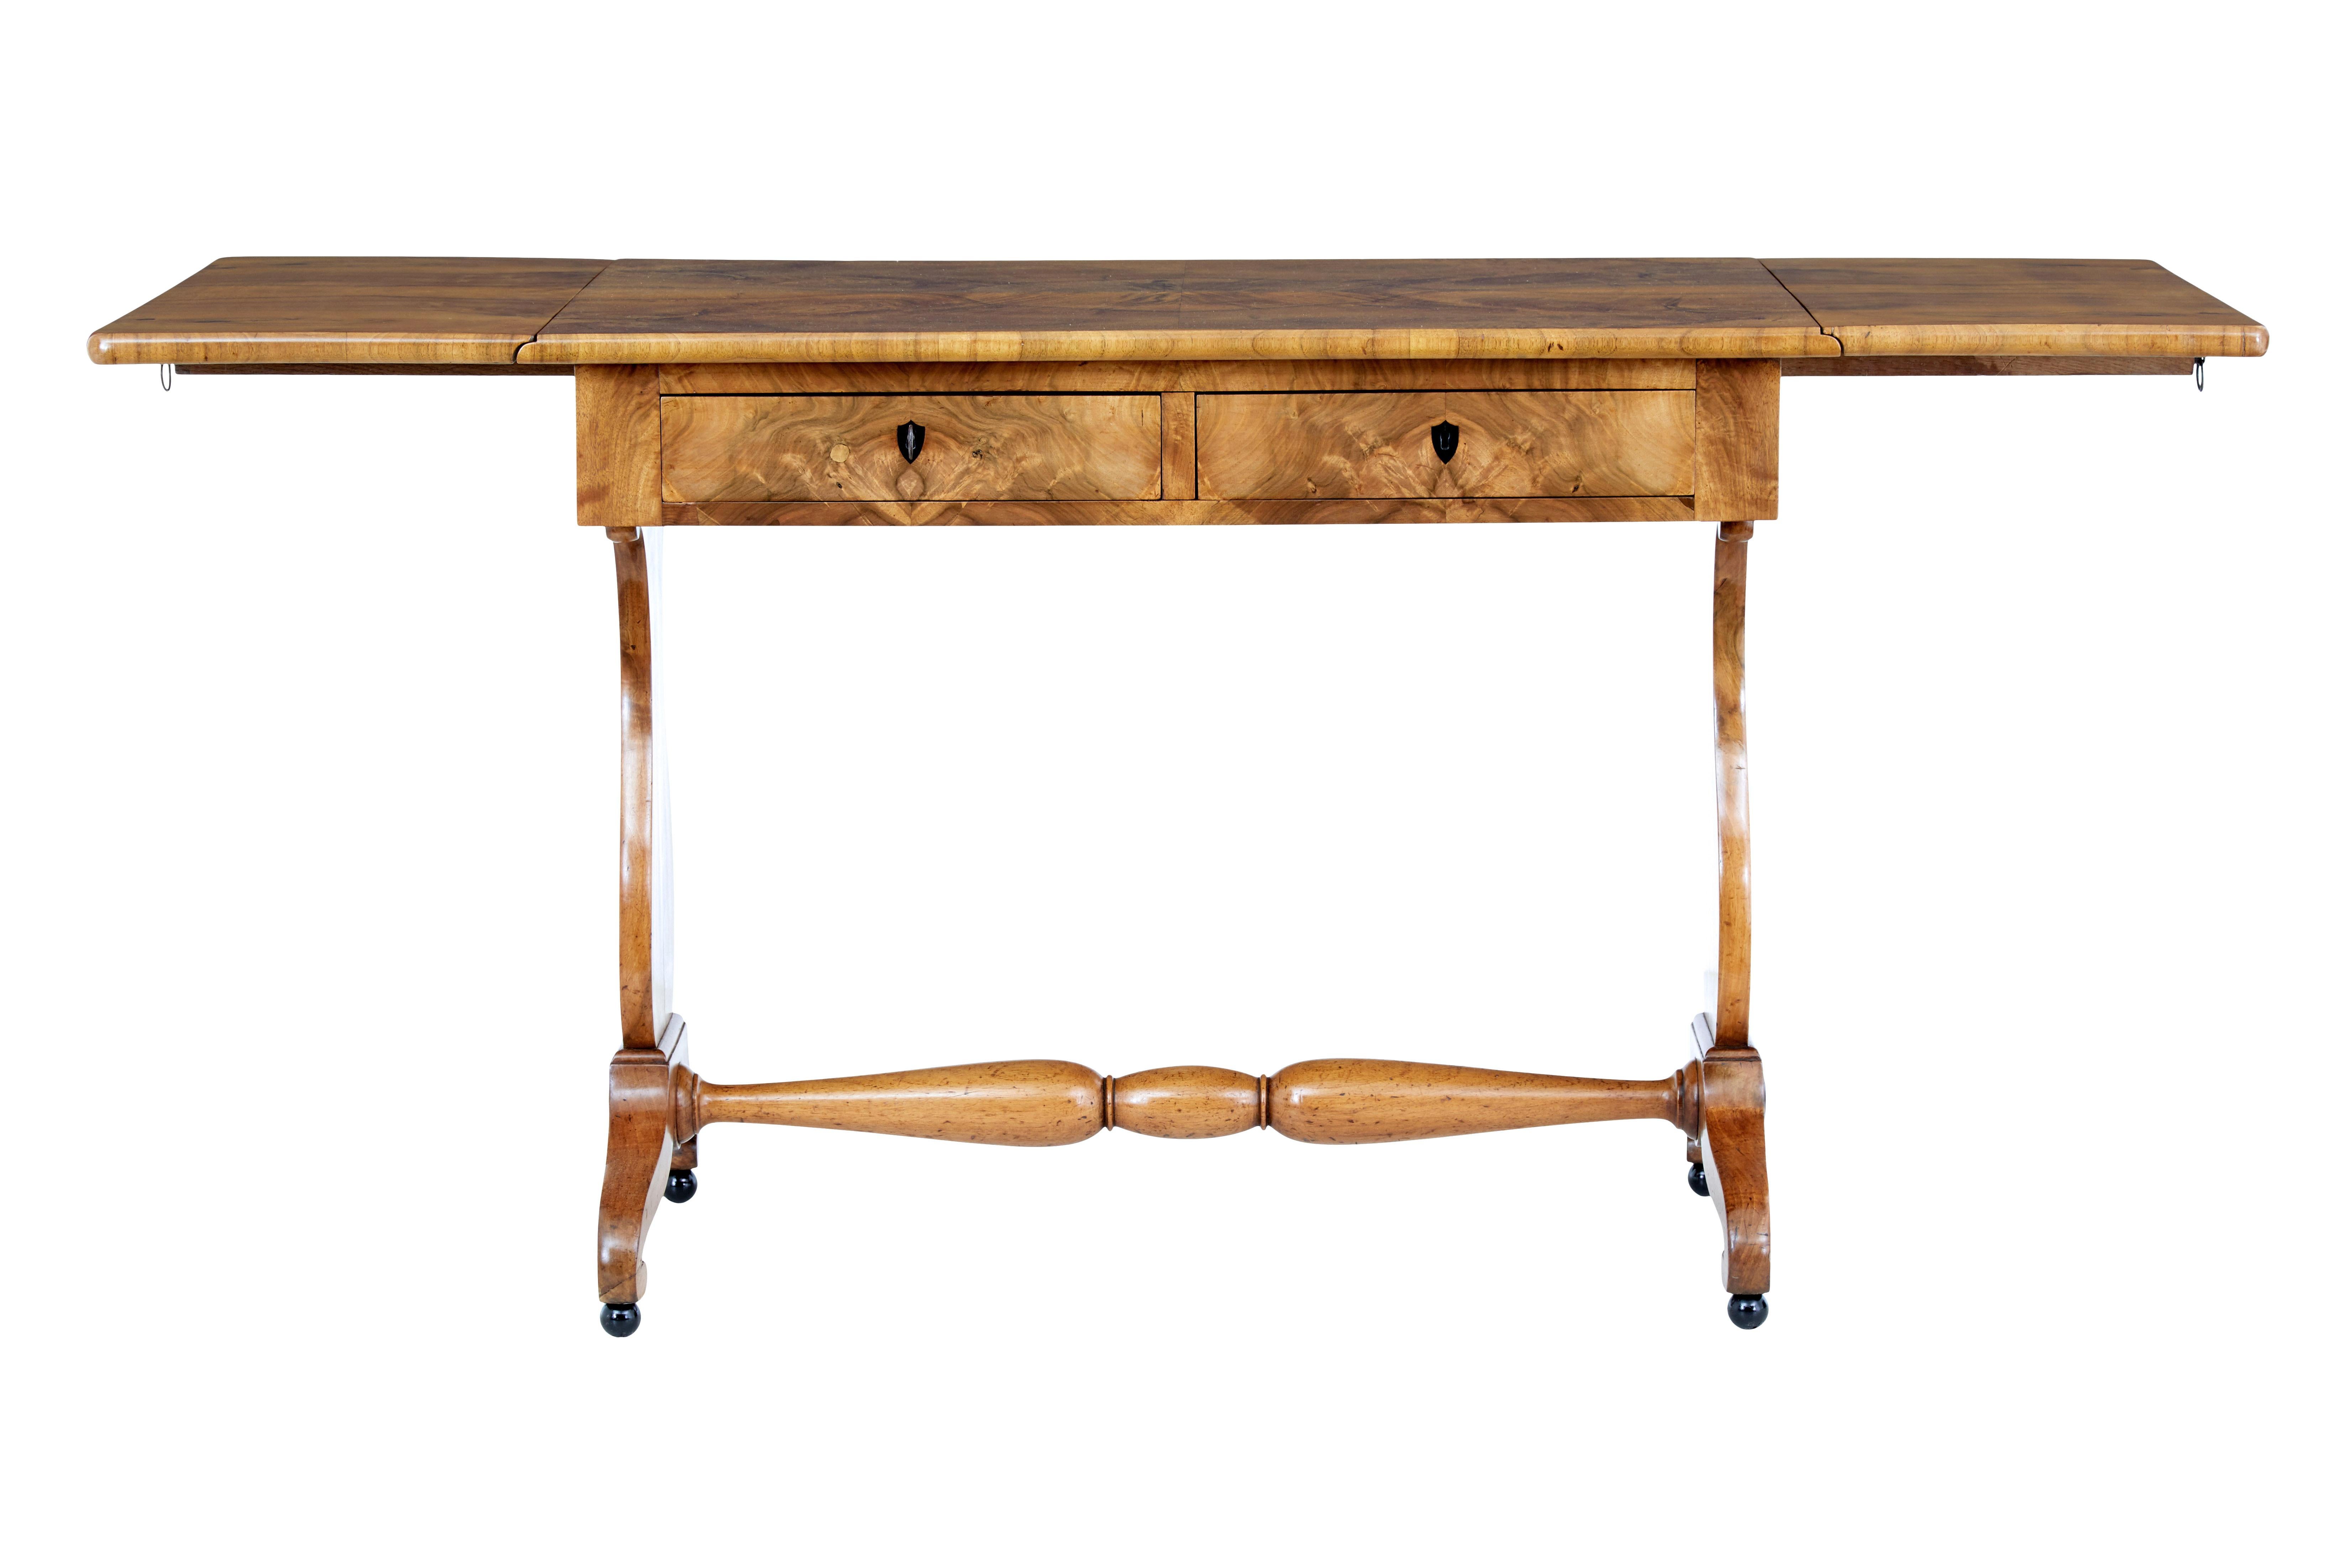 Inlay Swedish Empire Revival 1870s Birch Sofa Table with Drop Leaves and Carved Legs For Sale